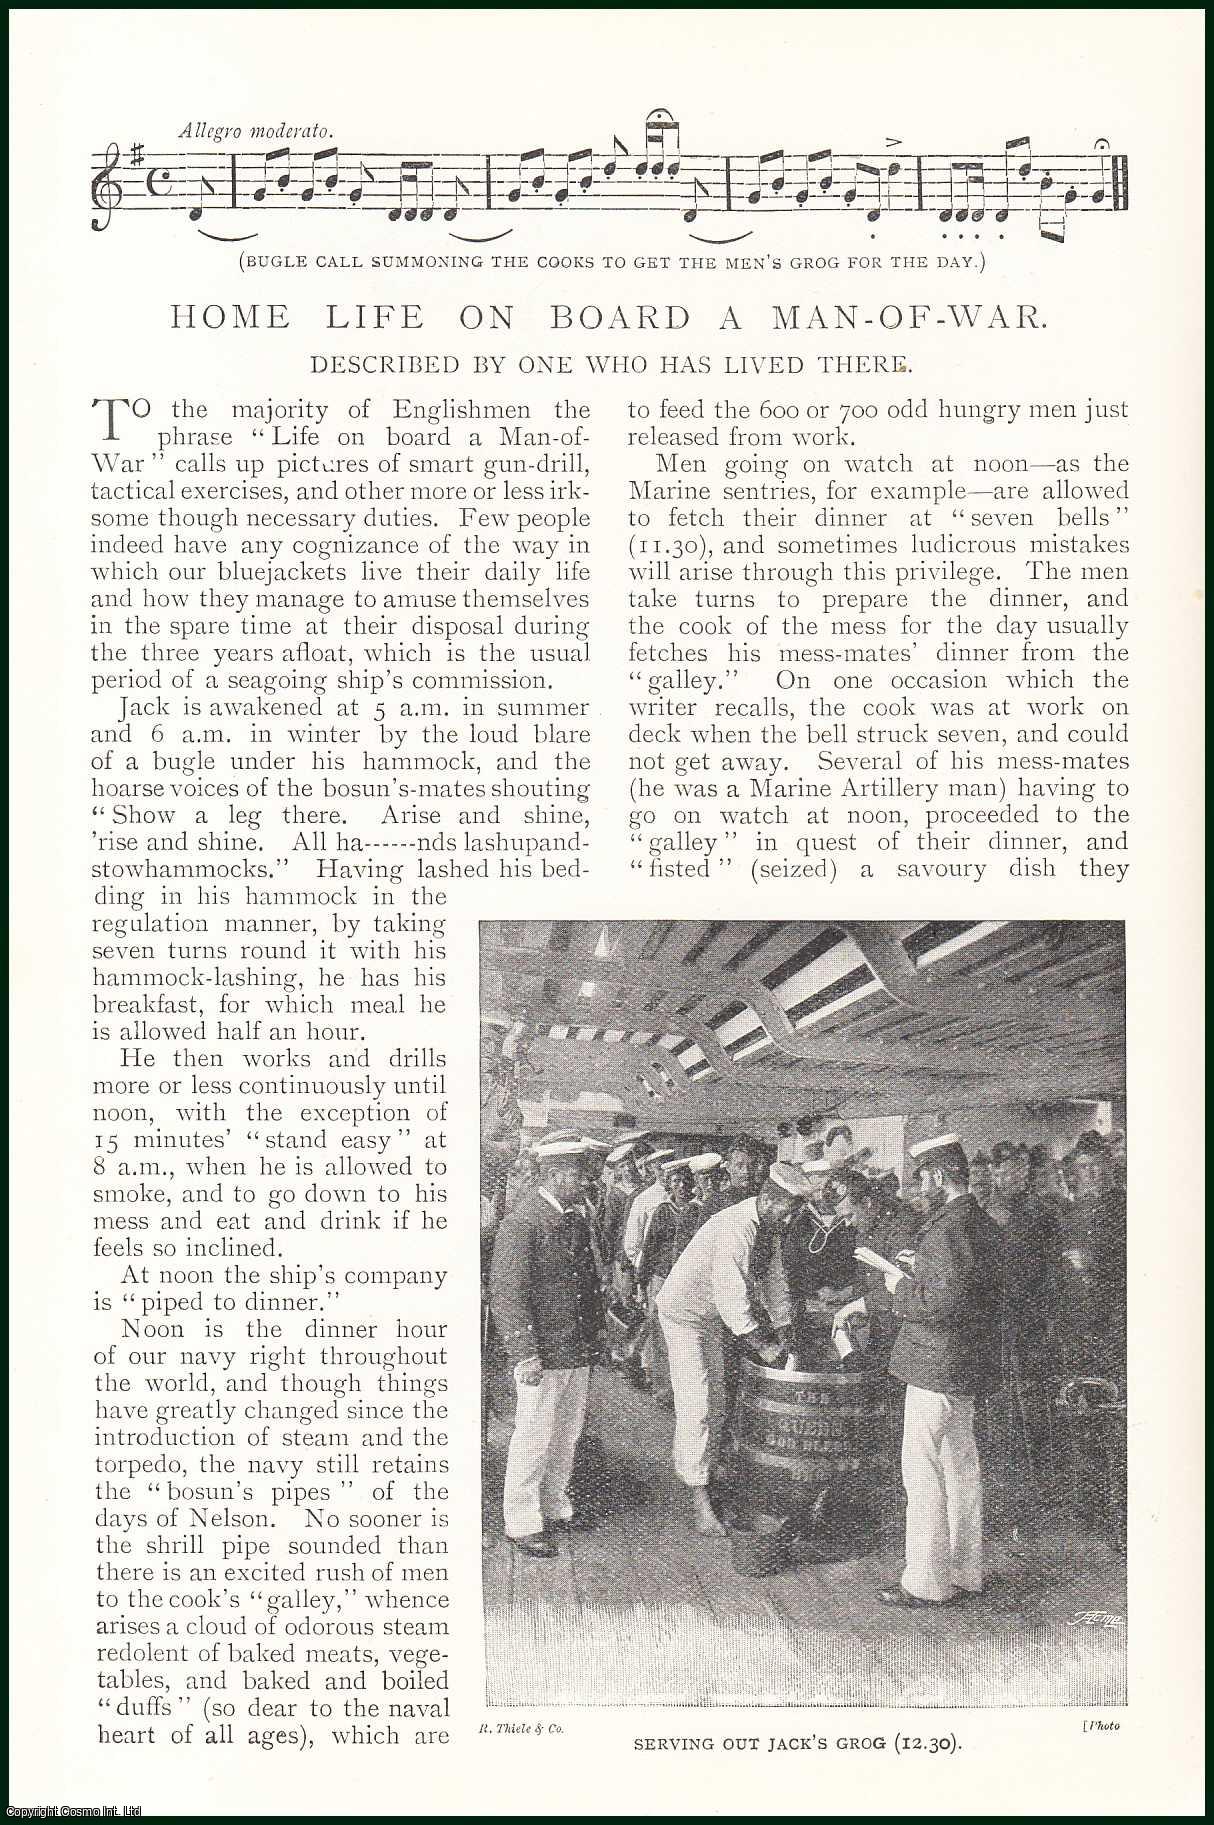 No Author Stated - Home Life on Board a Man-of-War. Described By One One Who Has Lived There. An uncommon original article from the Harmsworth London Magazine, 1898.